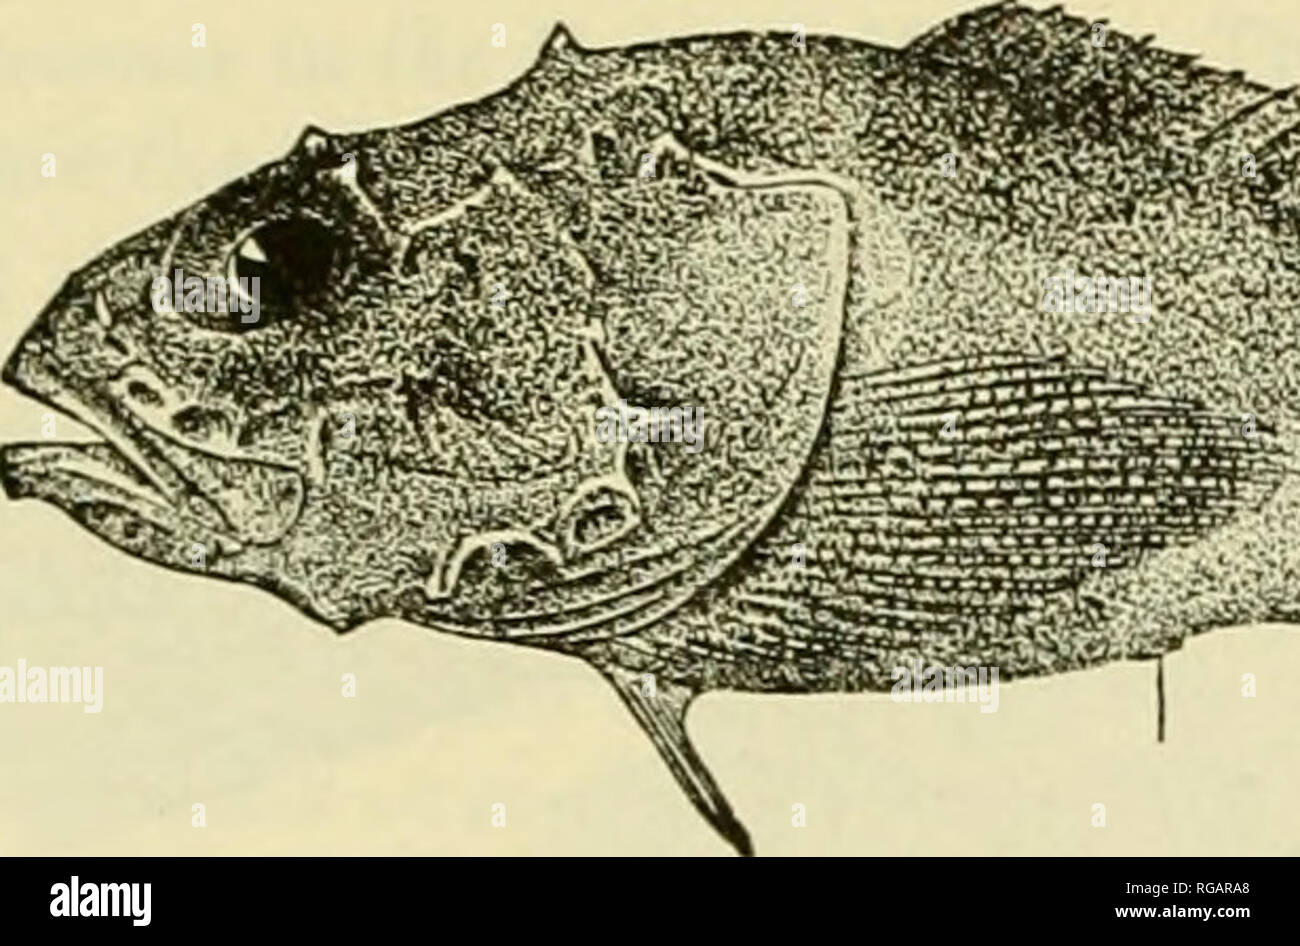 . Bulletin of the United States Fish Commission. Fisheries -- United States; Fish-culture -- United States. FISHES OF THE GULF OF MAINE 329 124. Deep-sea SCUlpin (('ottunculus microps Collett) Jordan and Evermann, 1896-1900, p. 1992. Description—In this species the head spines, so characteristic of most sculpins, are reduced to bony knobs, of which there are four on the top and several on the sides of the head. The two portions of the dorsal fin (spiny and soft) are united into one continuous fin, a feature that marks it off from all other local sculpins, while the spiny part (only 6 spines) i Stock Photo